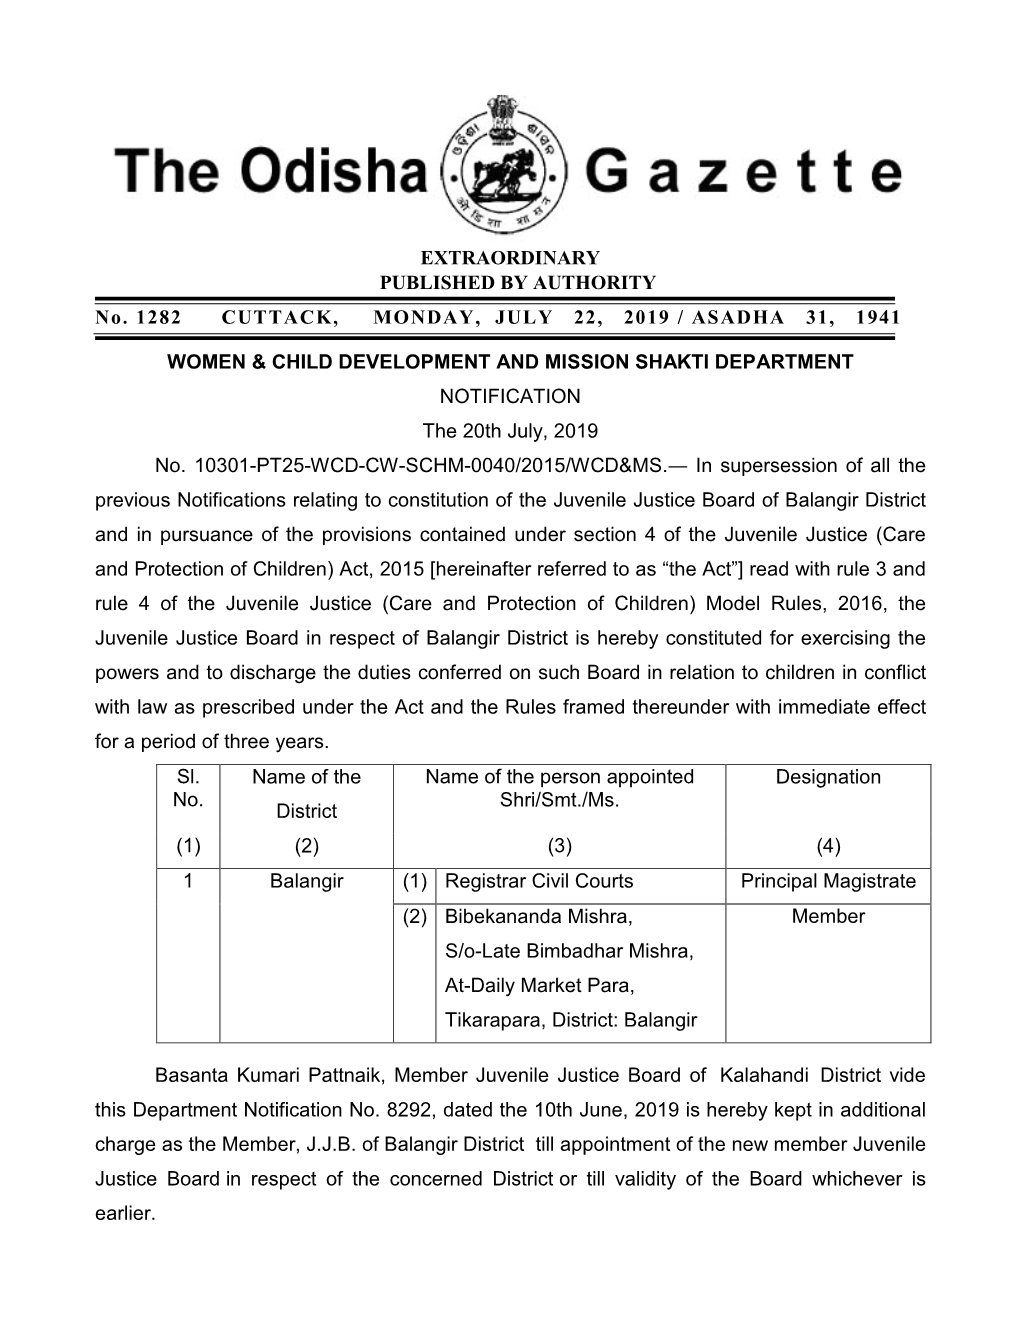 EXTRAORDINARY PUBLISHED by AUTHORITY No. 1282 CUTTACK, MONDAY, JULY 22, 2019 / ASADHA 31, 1941